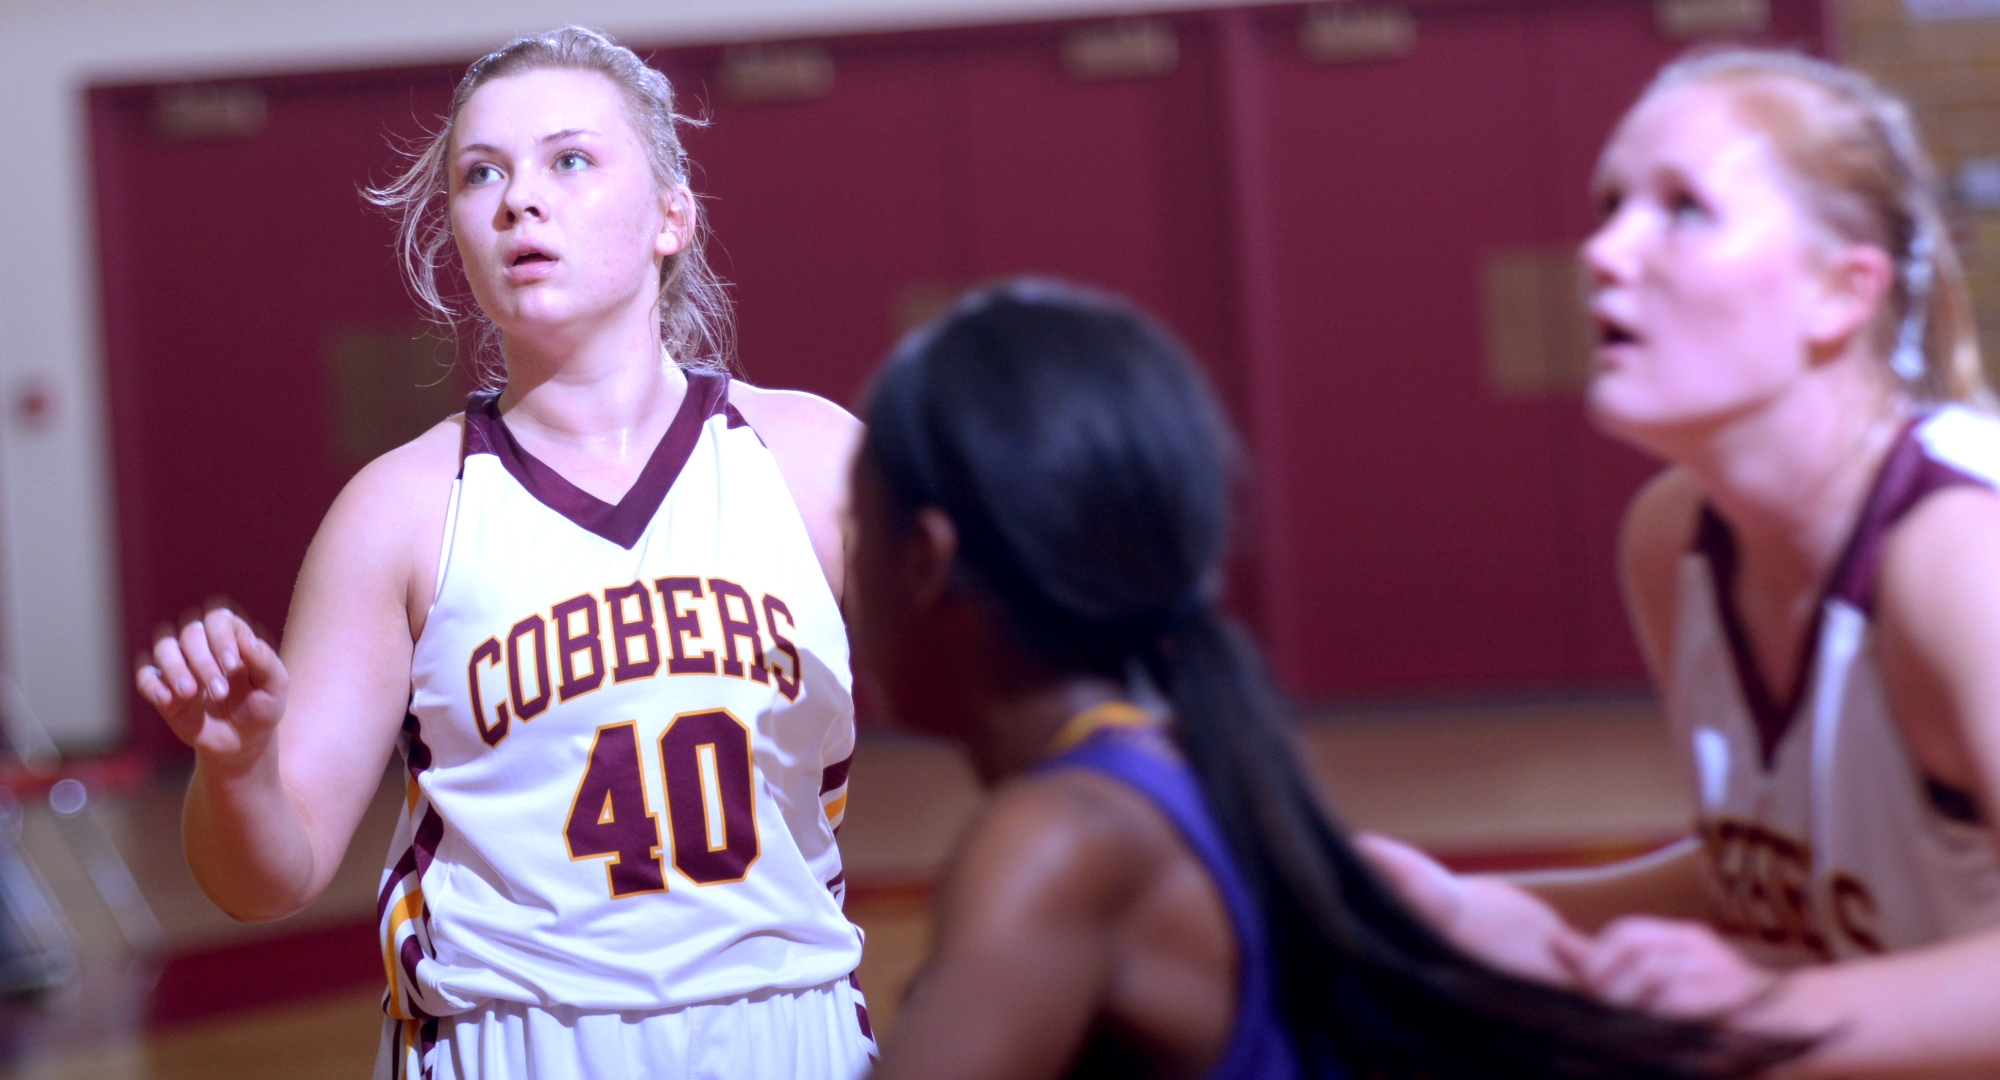 Junior Mira Ellefson scored a team-high 10 points in the Cobbers' game at Augsburg.